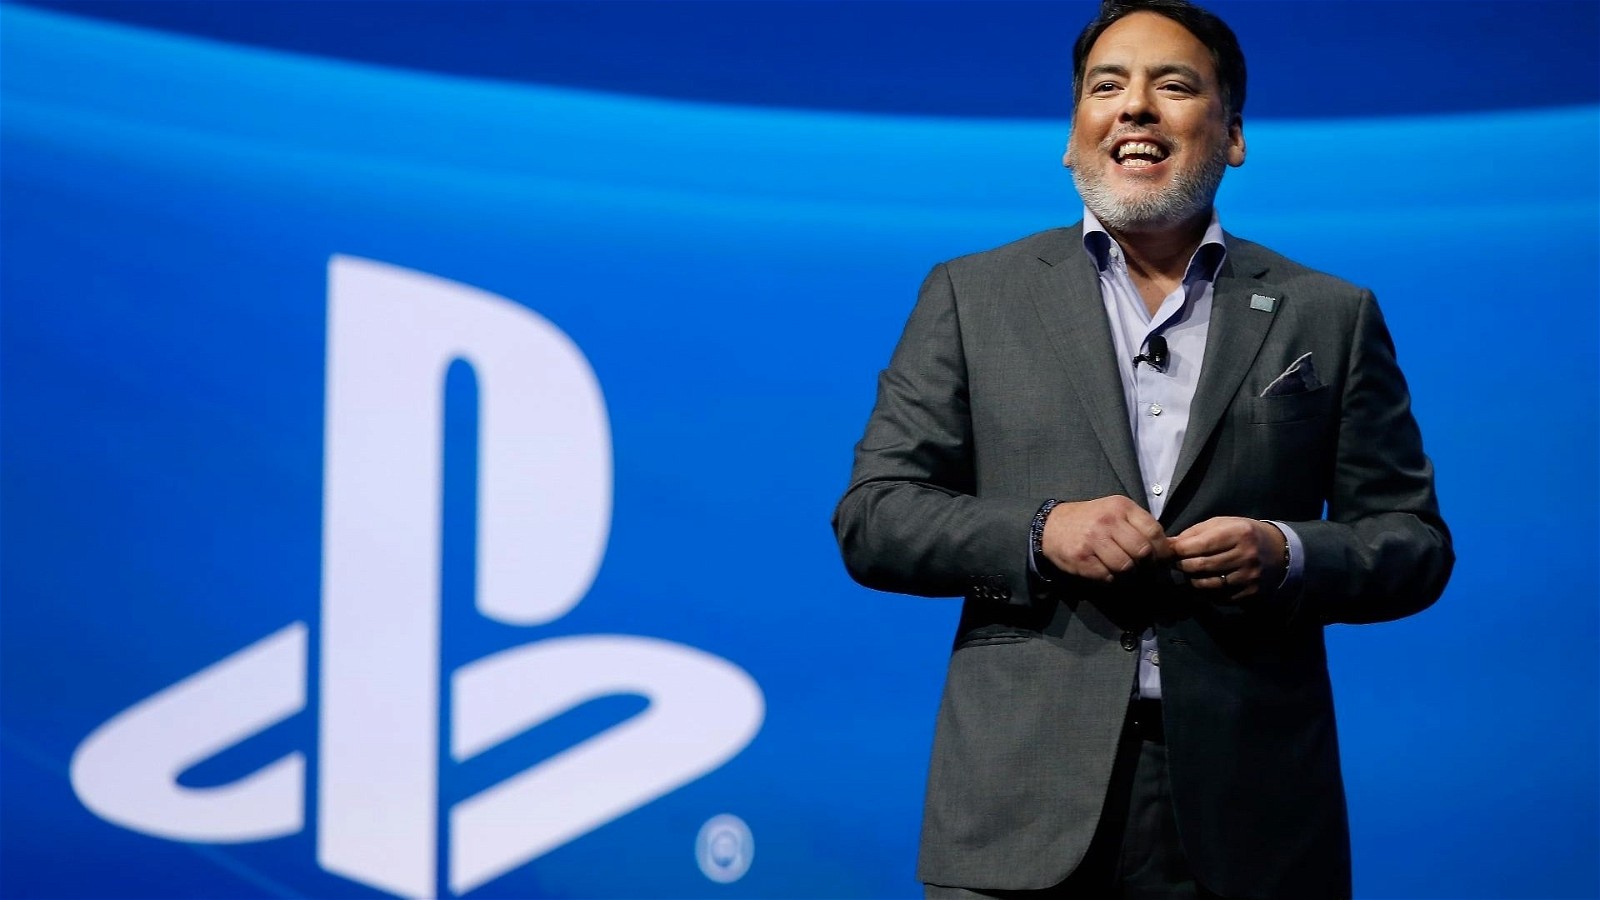 The former PlayStation boss thinks AAA games need as many players as possible to make a profit. Image credit: PlayStation